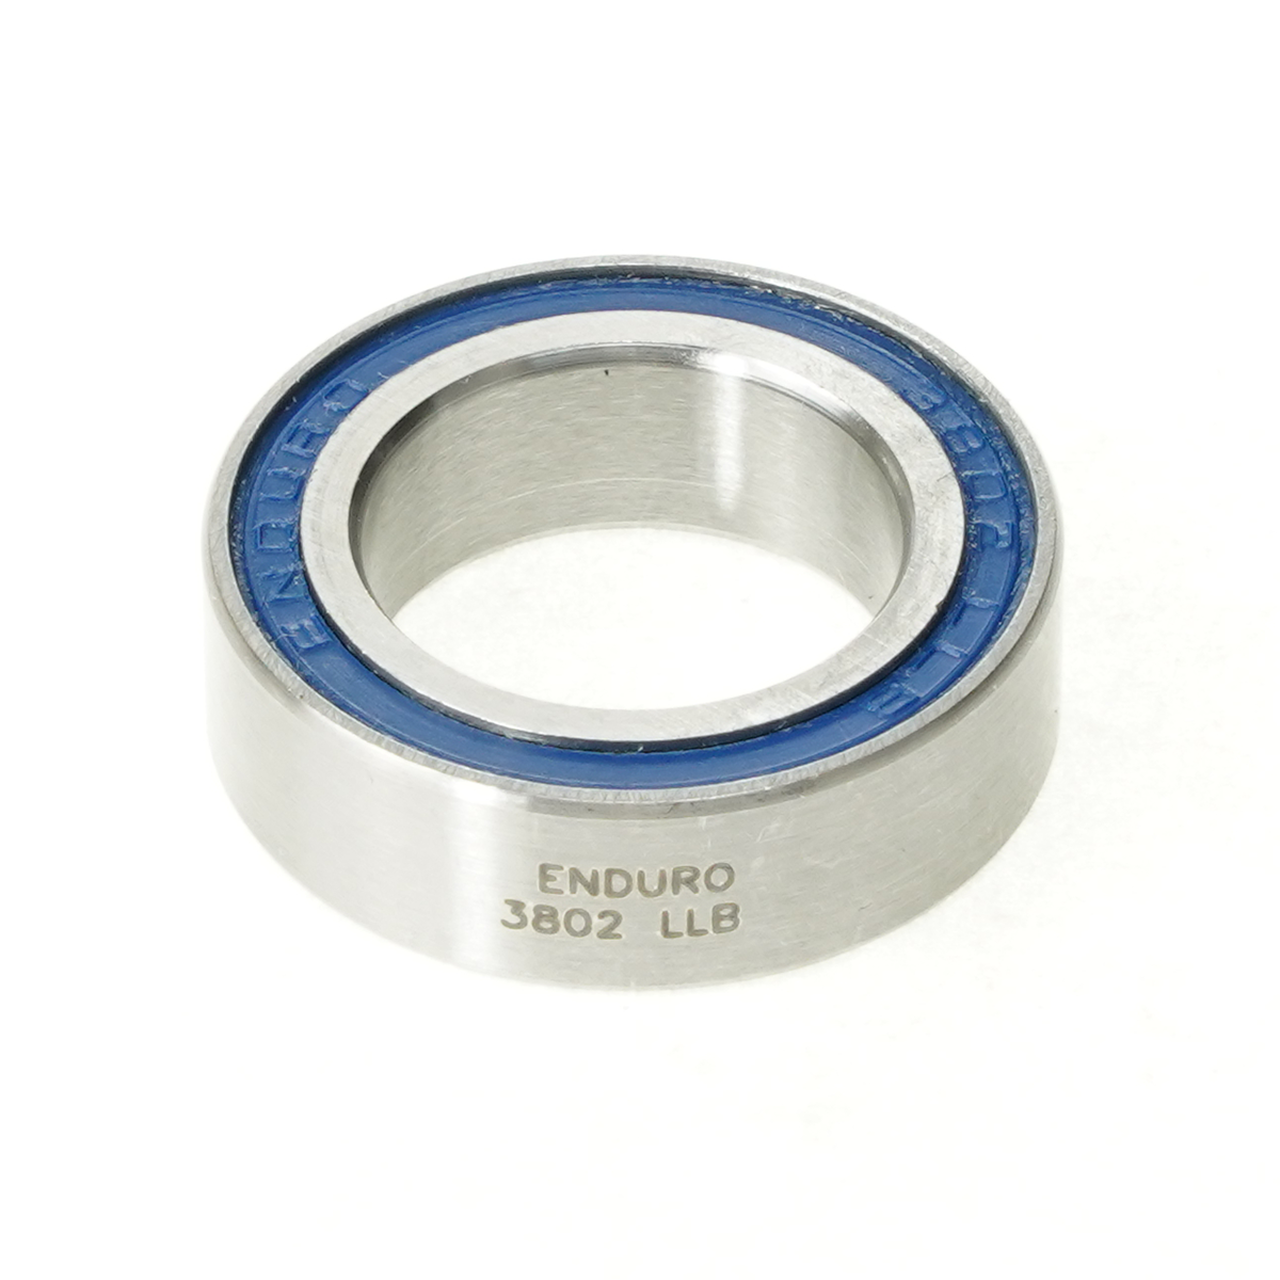 Enduro 3802 LLB - ABEC-3, Double-Row, Radial Bearing (C3 Clearance) - 15mm x 24mm x 7mm